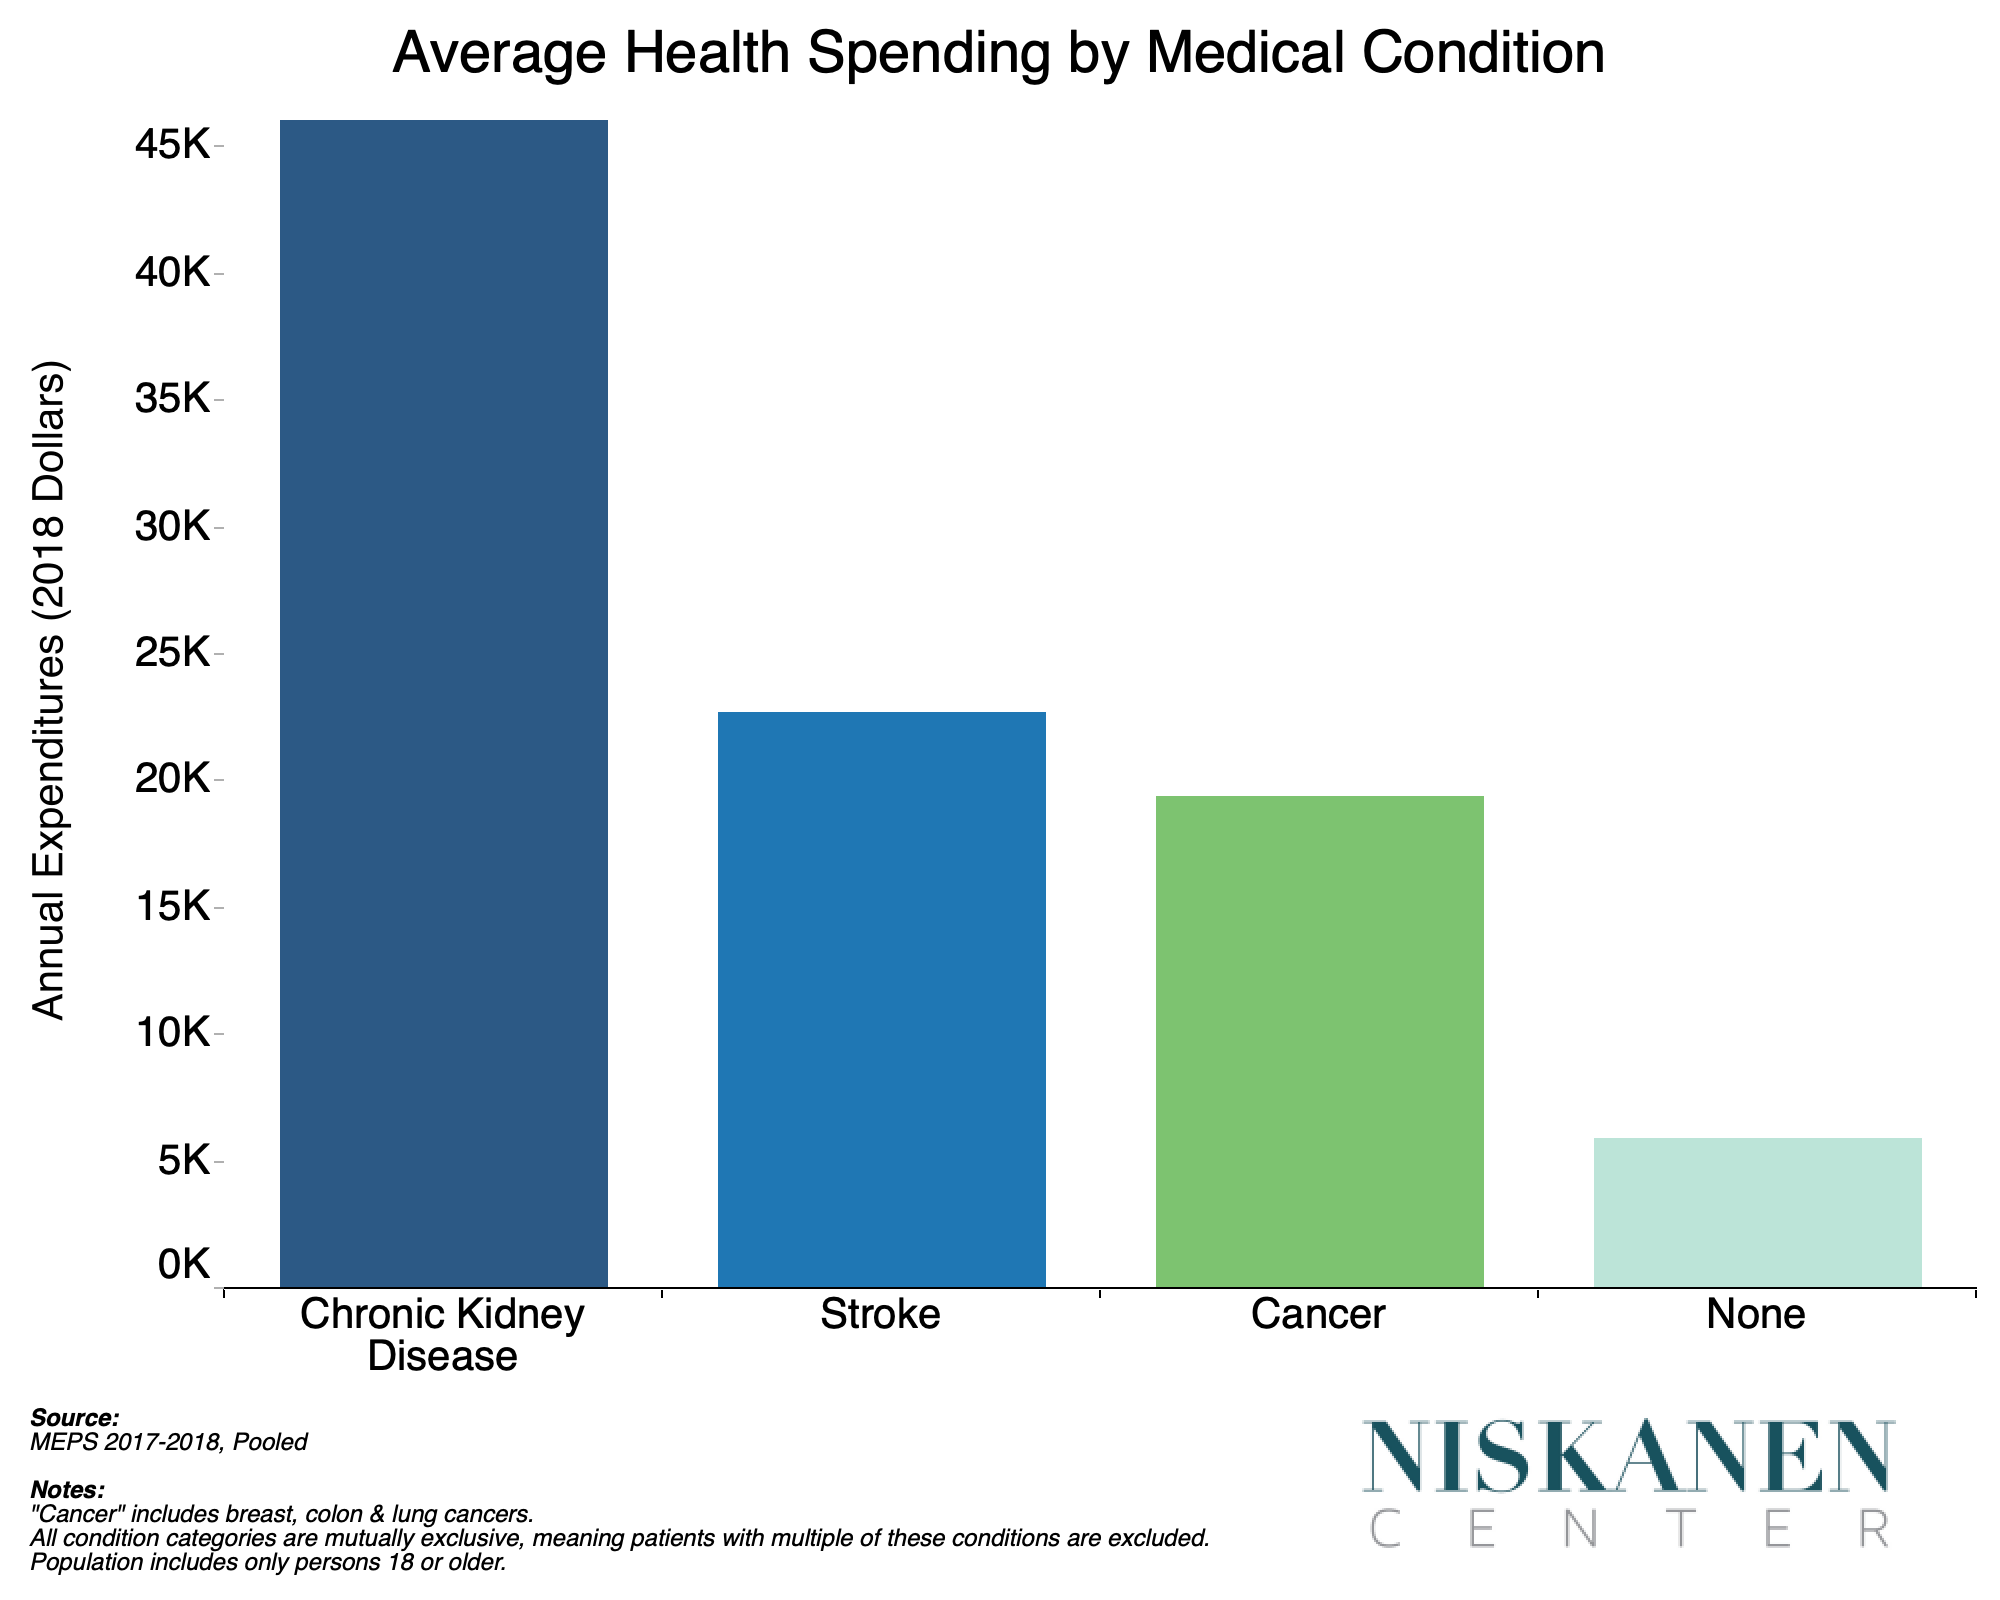 Federal Policy Can Improve The Lives Of Those With Kidney Disease While Spending Less Niskanen Center